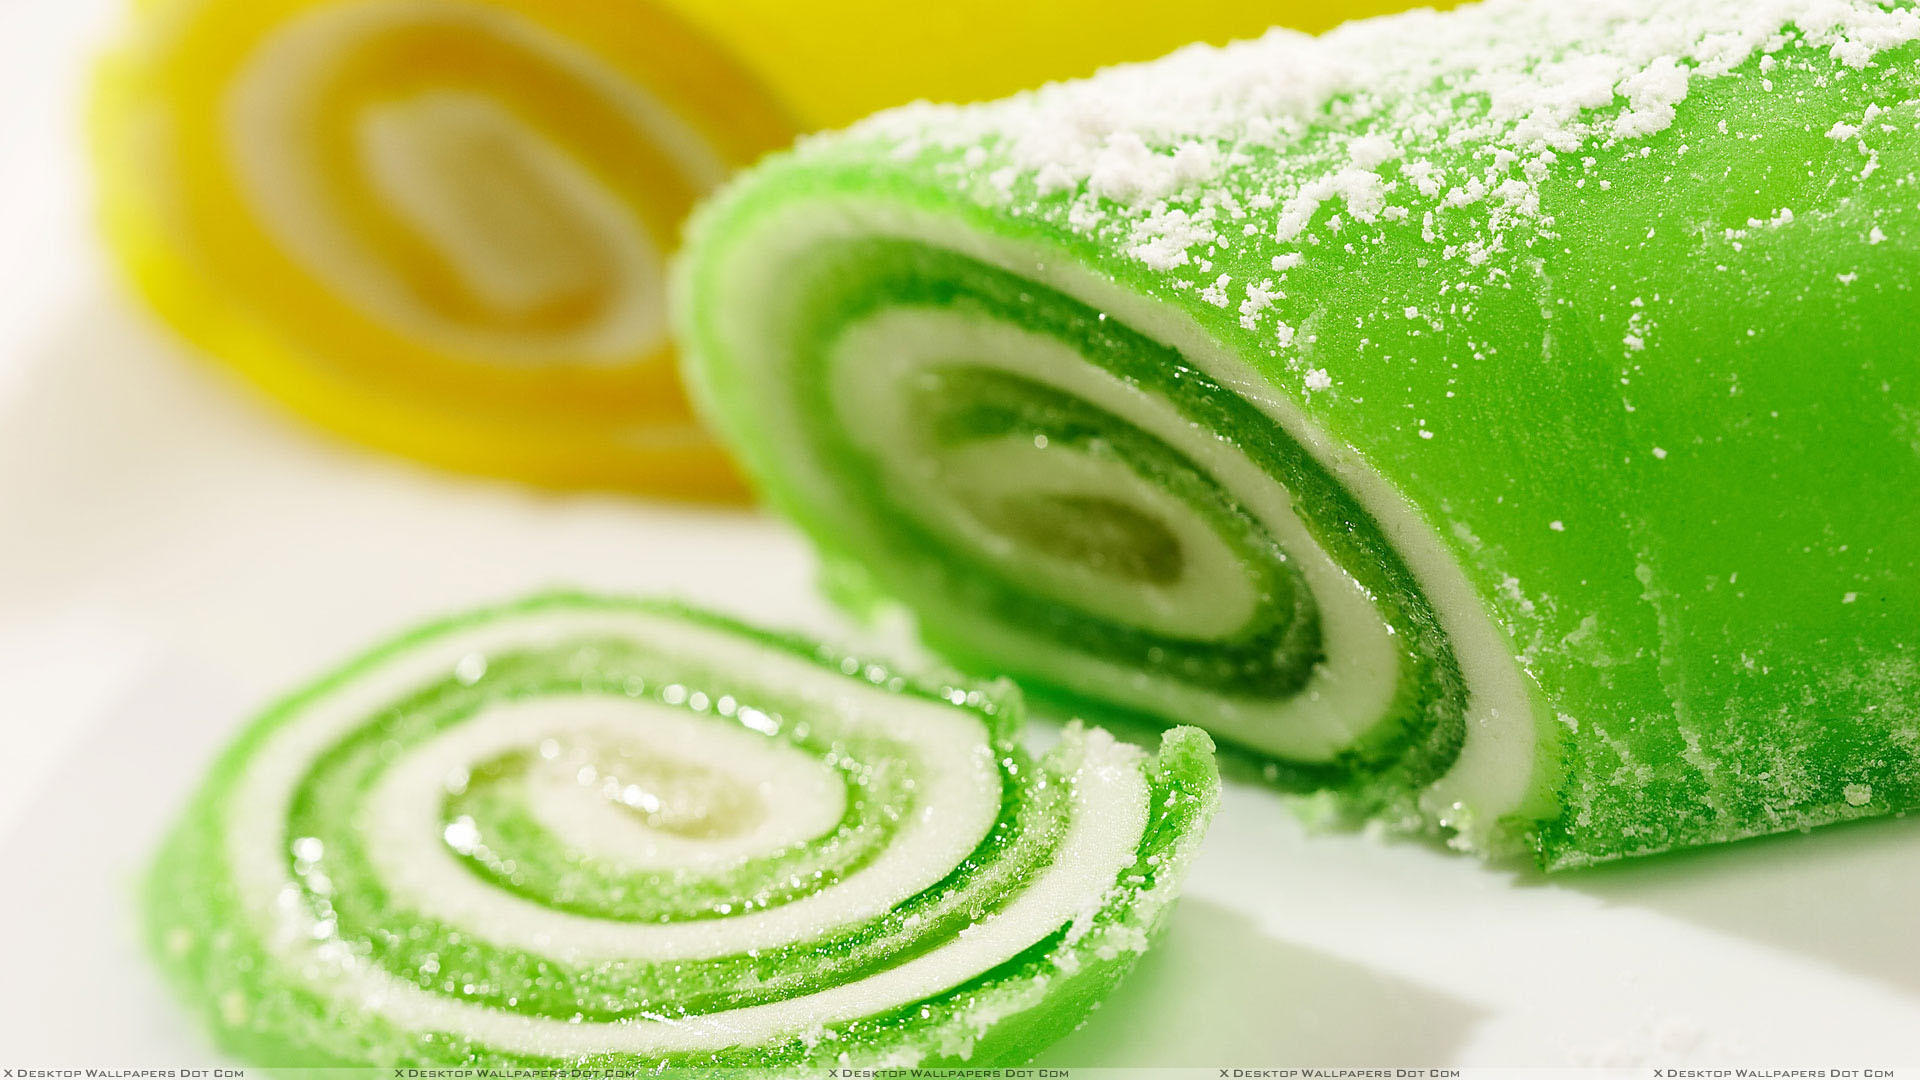 Green and yellow candy, Sweet indulgence, Eye-catching wallpapers, Colorful delight, 1920x1080 Full HD Desktop